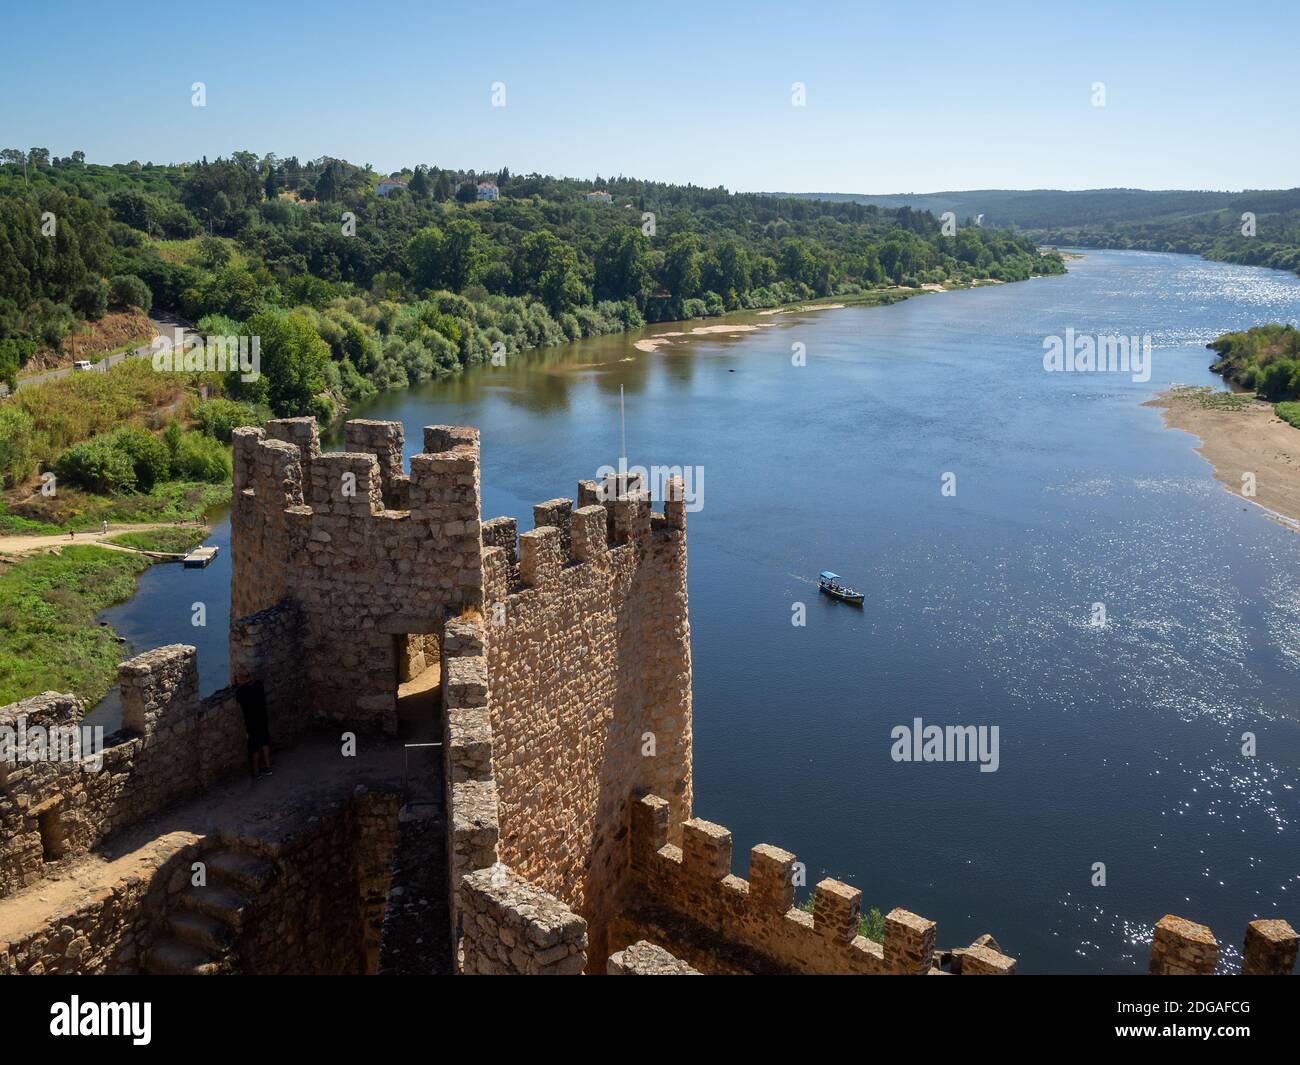 View of Tagus River from the top of Almorol Castle tower with it's battlements Stock Photo